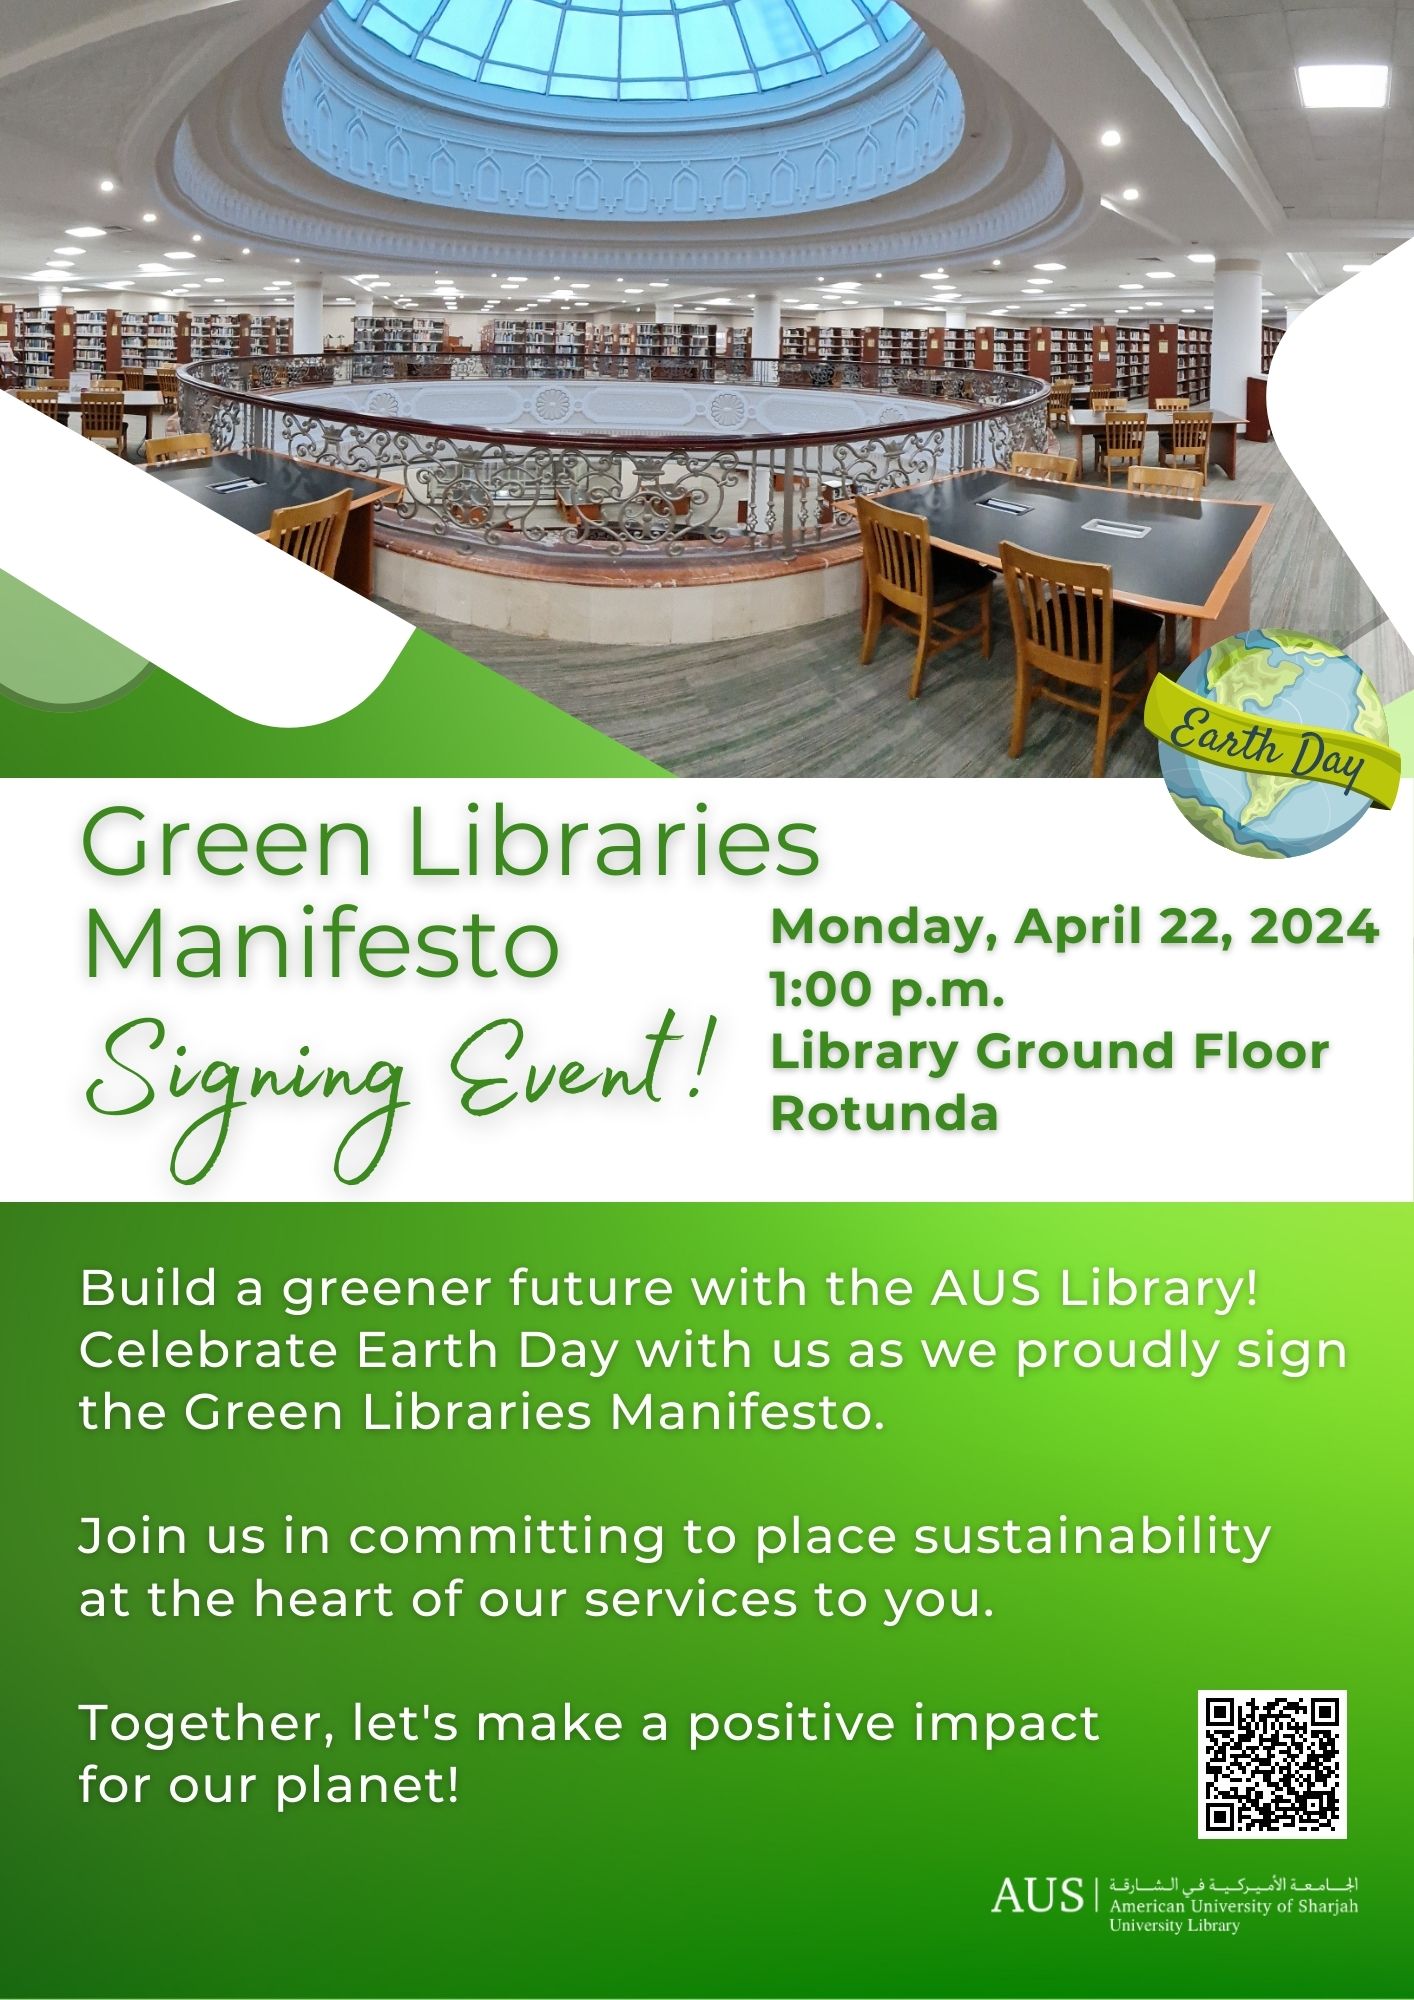 Build a greener future and celebrate Earth Day with the AUS Library! 